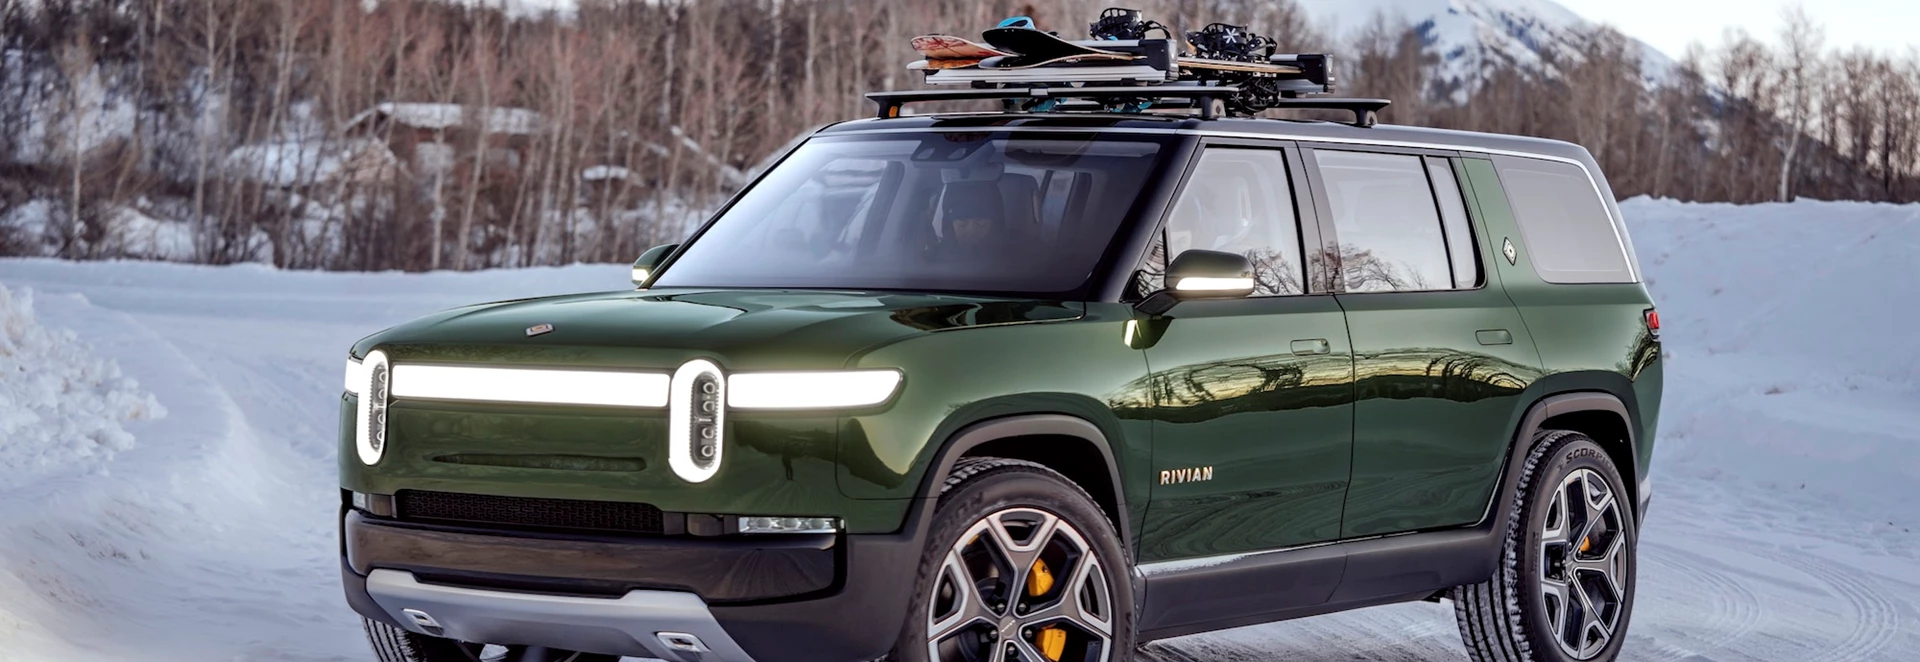 Ford invests £388m in electric car start-up Rivian